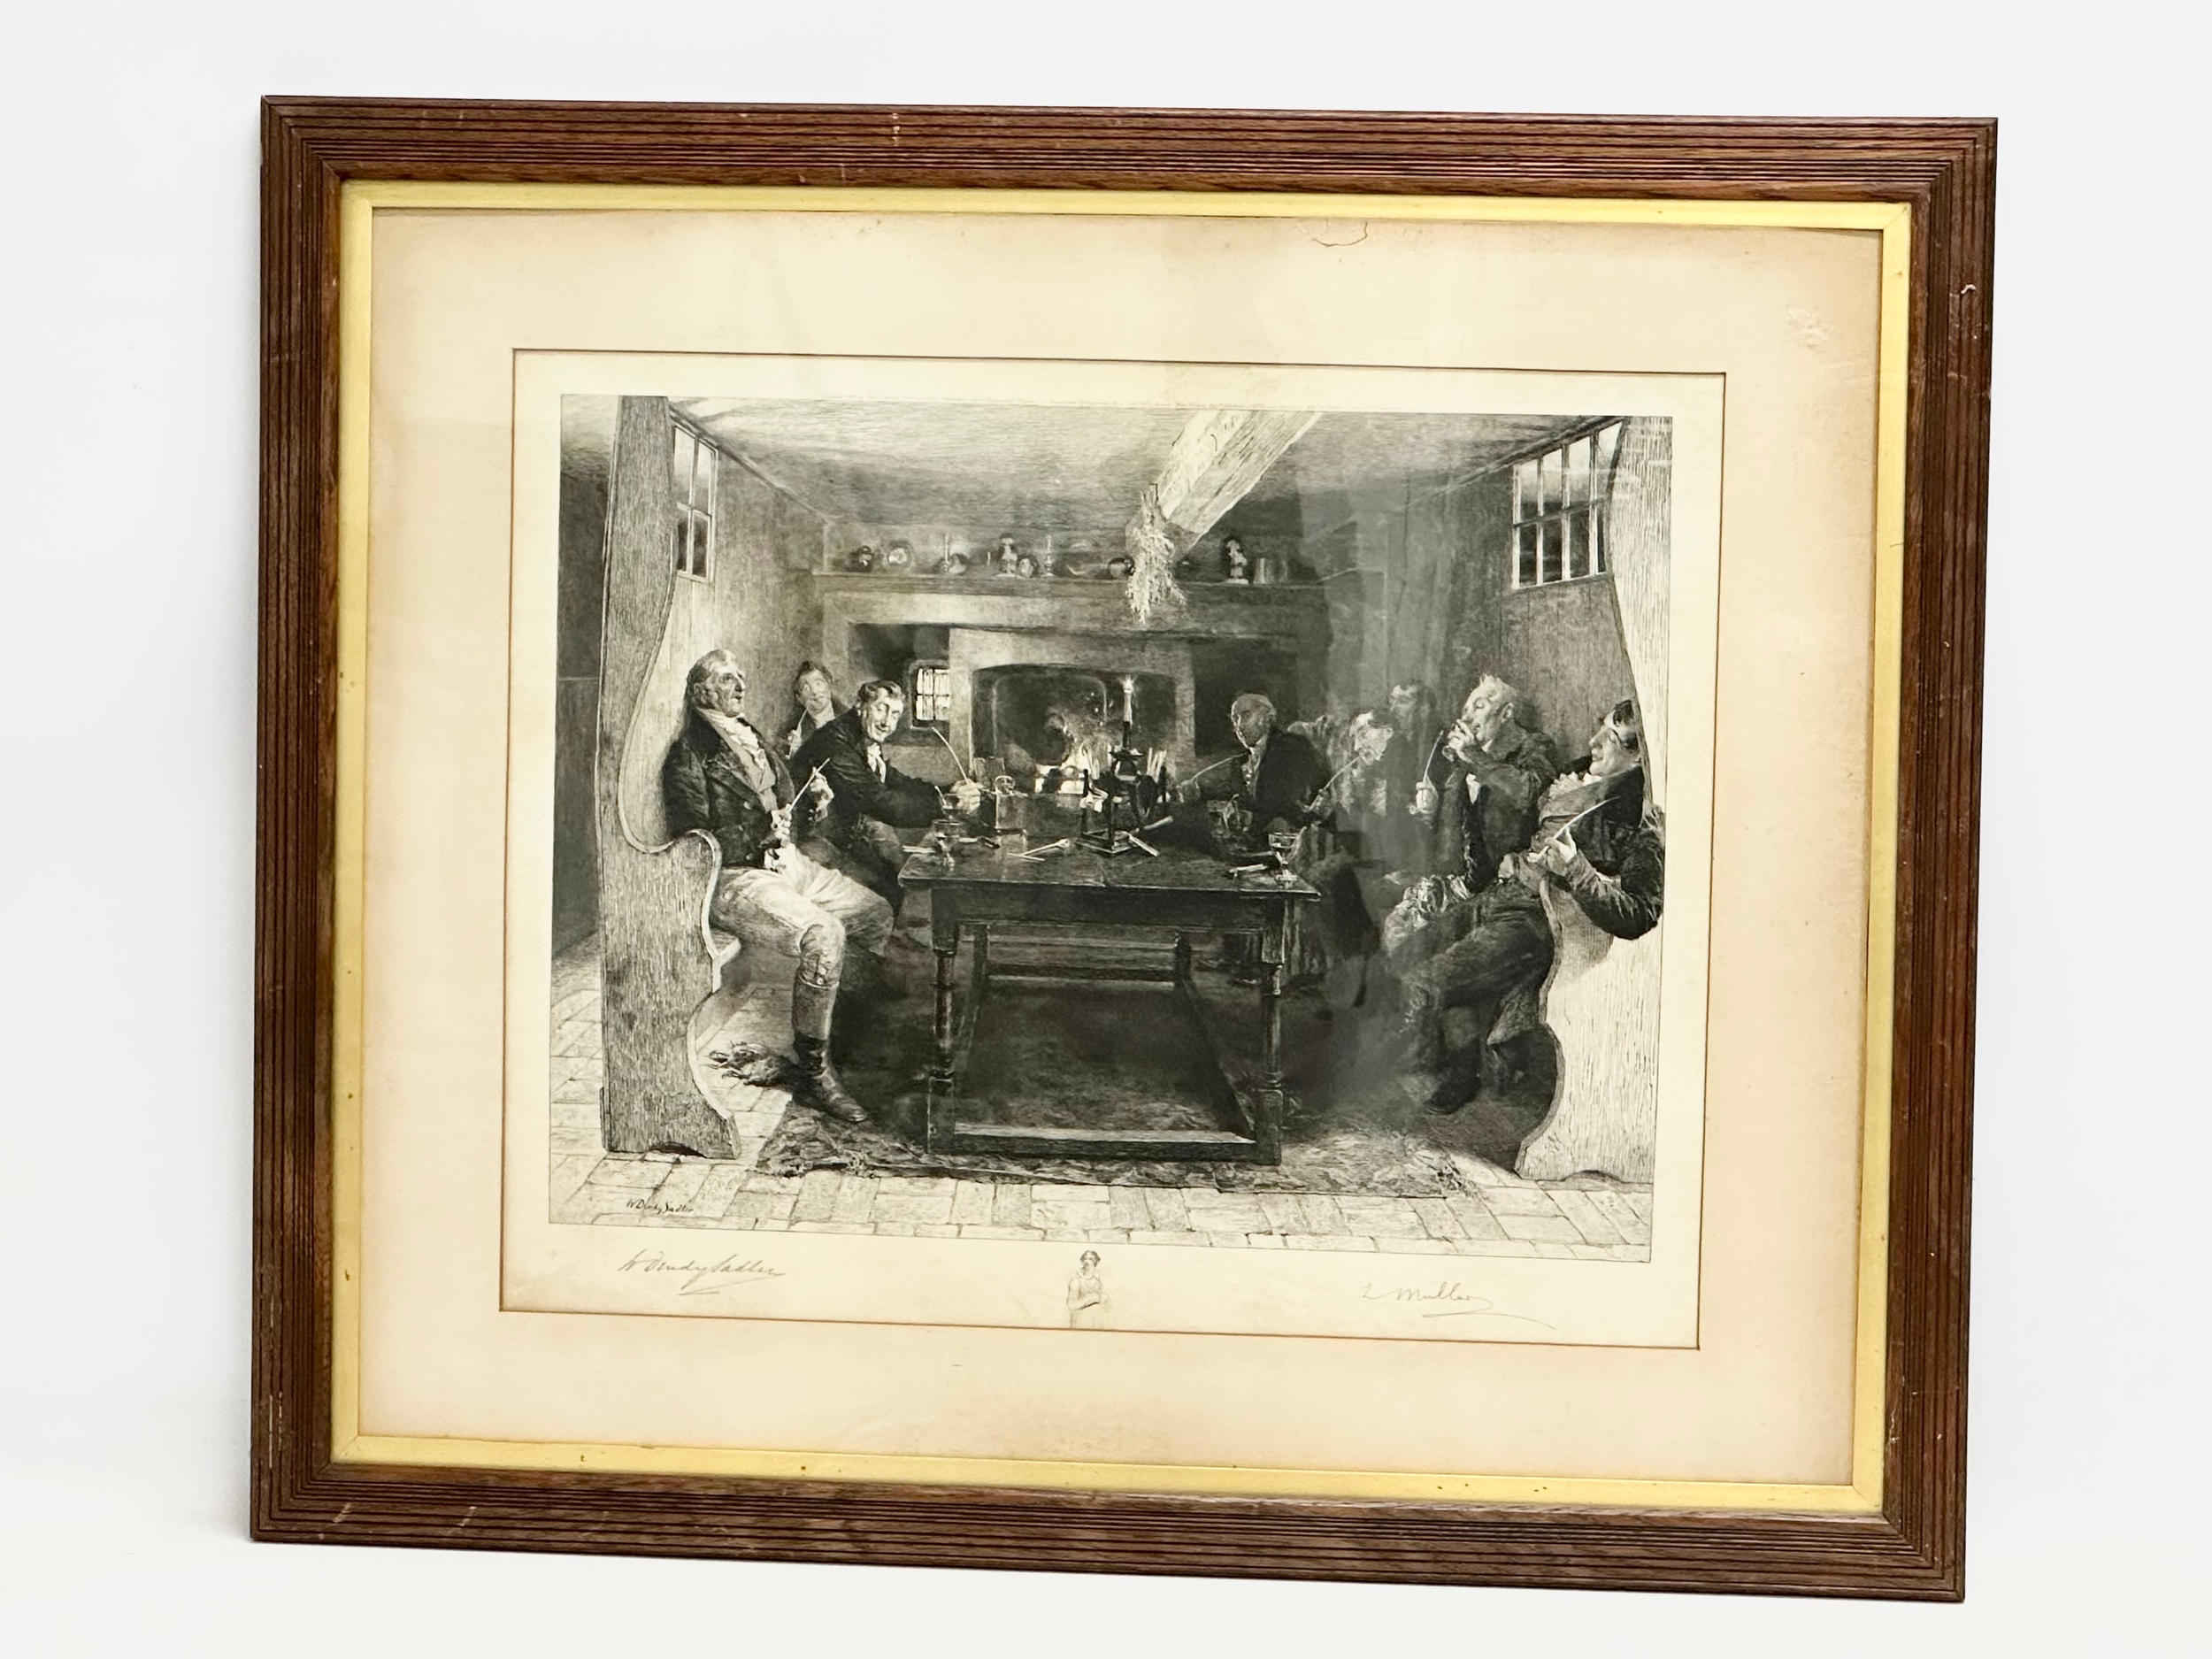 An Early 20th Century signed etching ‘The Squires Song’ from the original painting by Walter Dendy